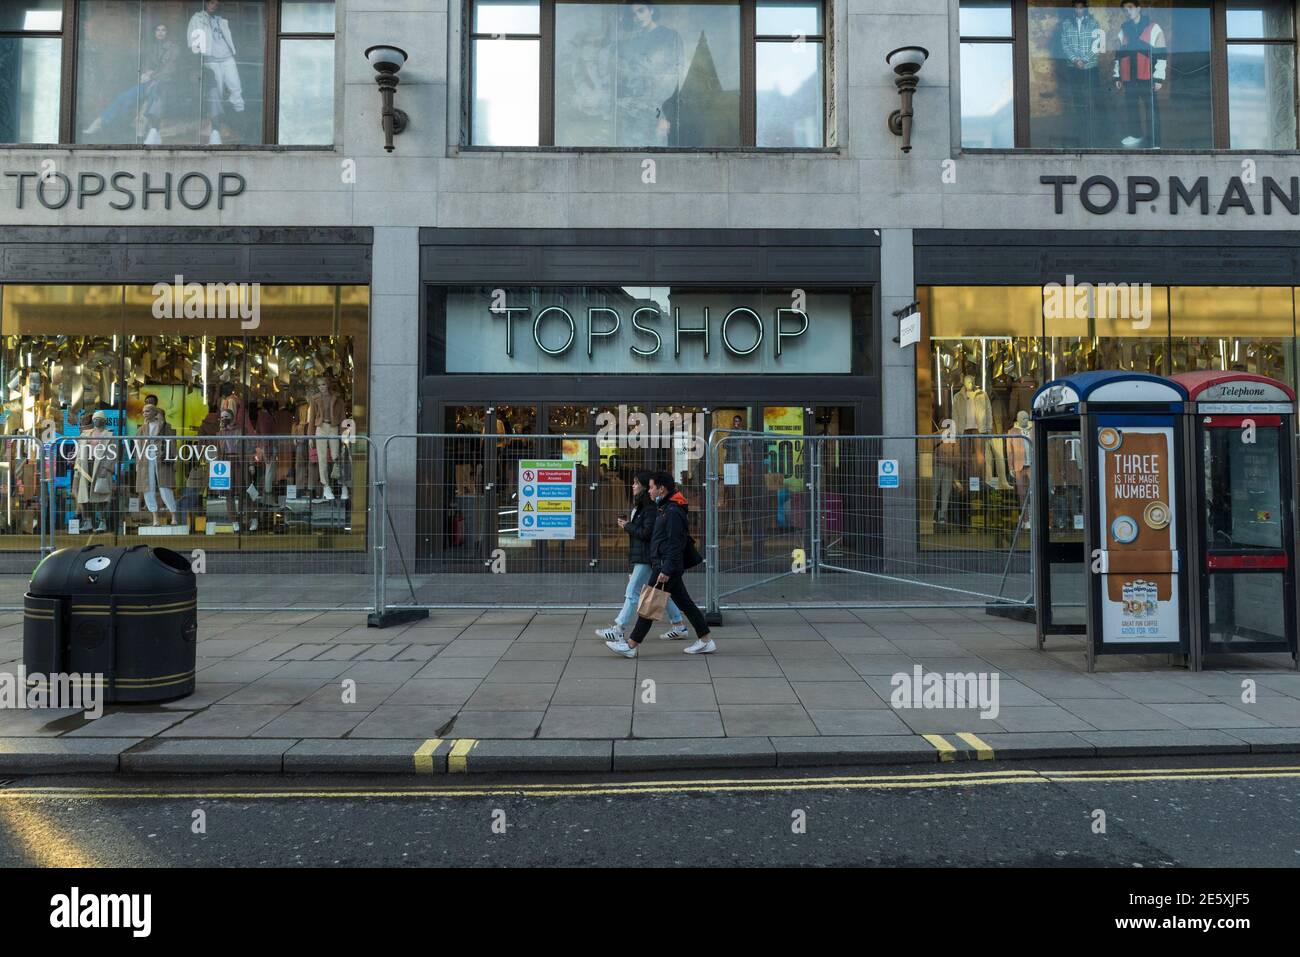 London, UK. 28 January 2021. Construction fencing surrounds the flagship of  Topshop on Oxford Street, the traditional home of retail in the West End.  Online retailer Asos is reported to be interested